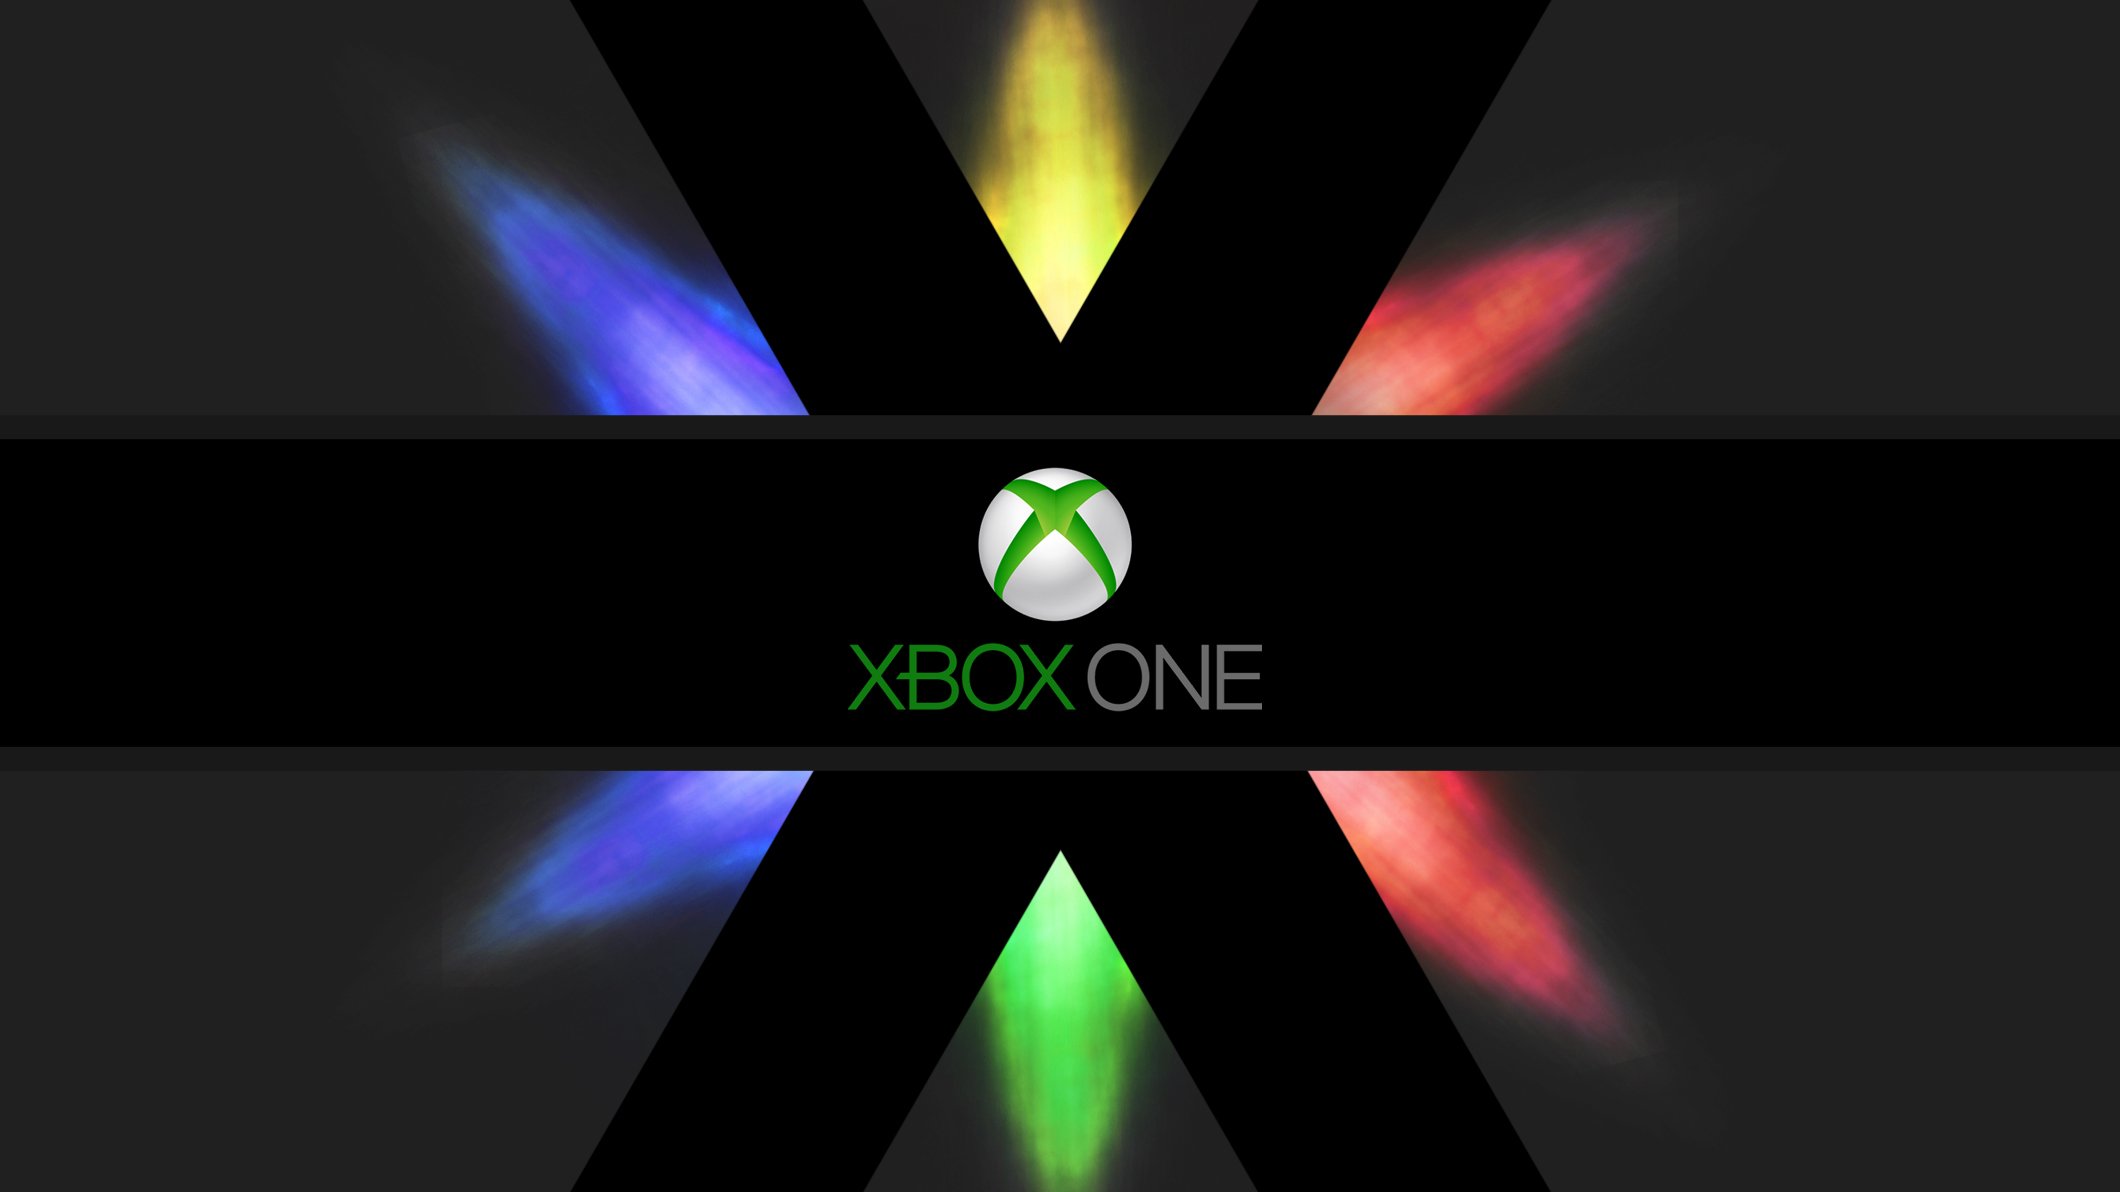 XBOX ONE video game system microsoft wallpaper background